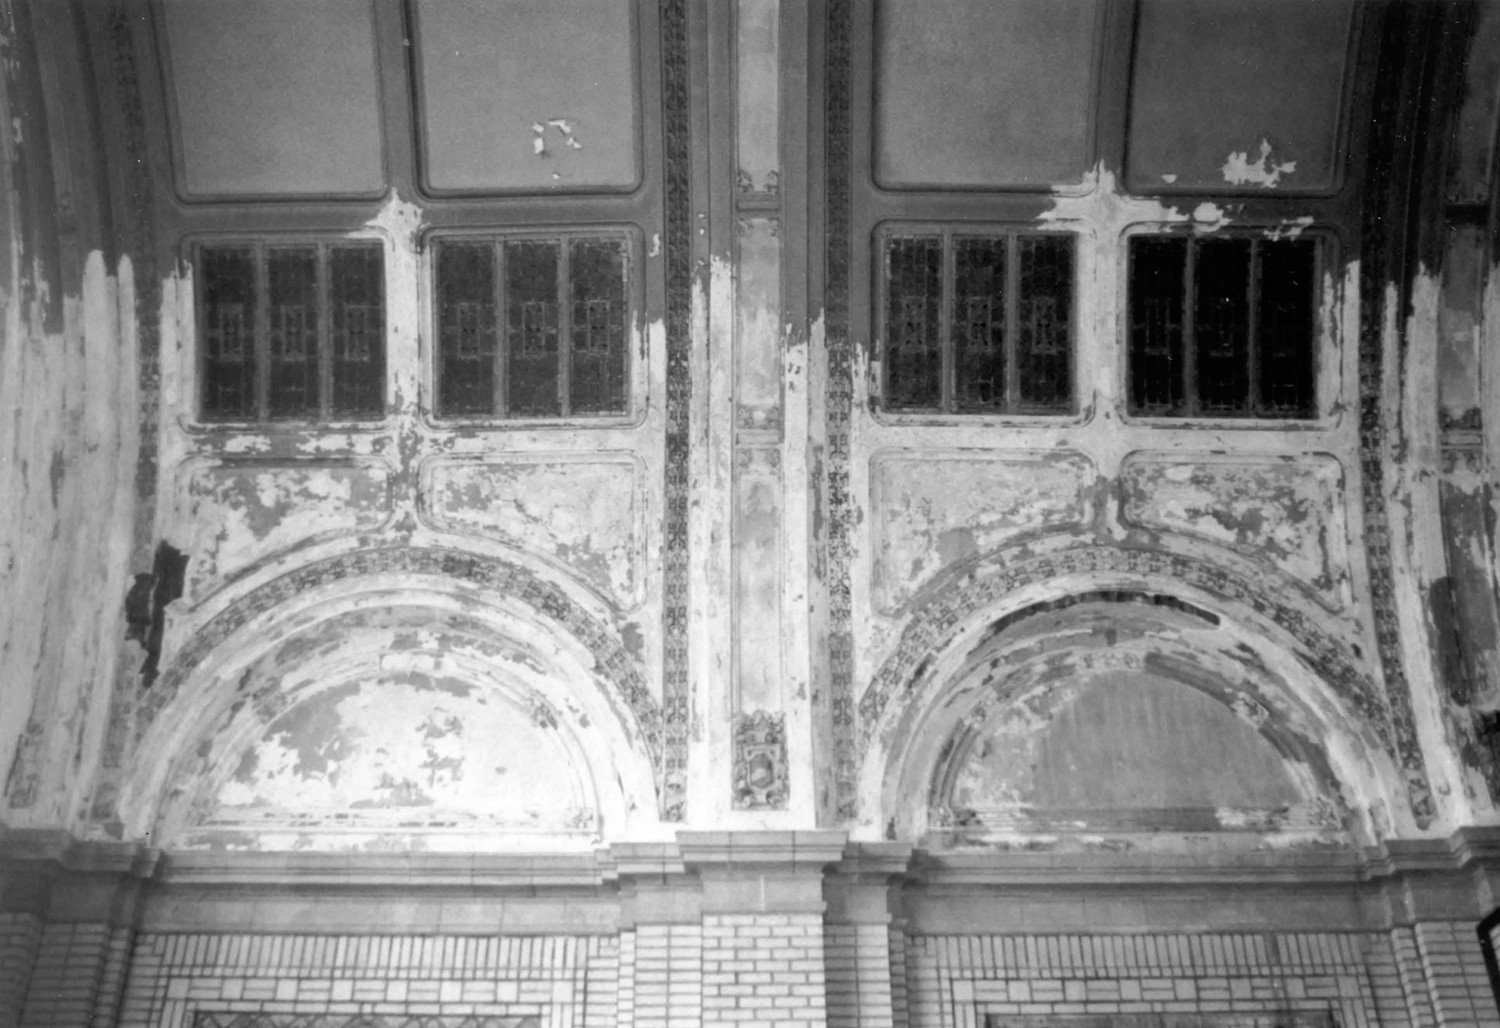 Pennsylvania Railroad Station - Baker Street Station, Fort Wayne Indiana Two northernmost bays of the barrel-vaulted ceiling in the main concourse (1997)